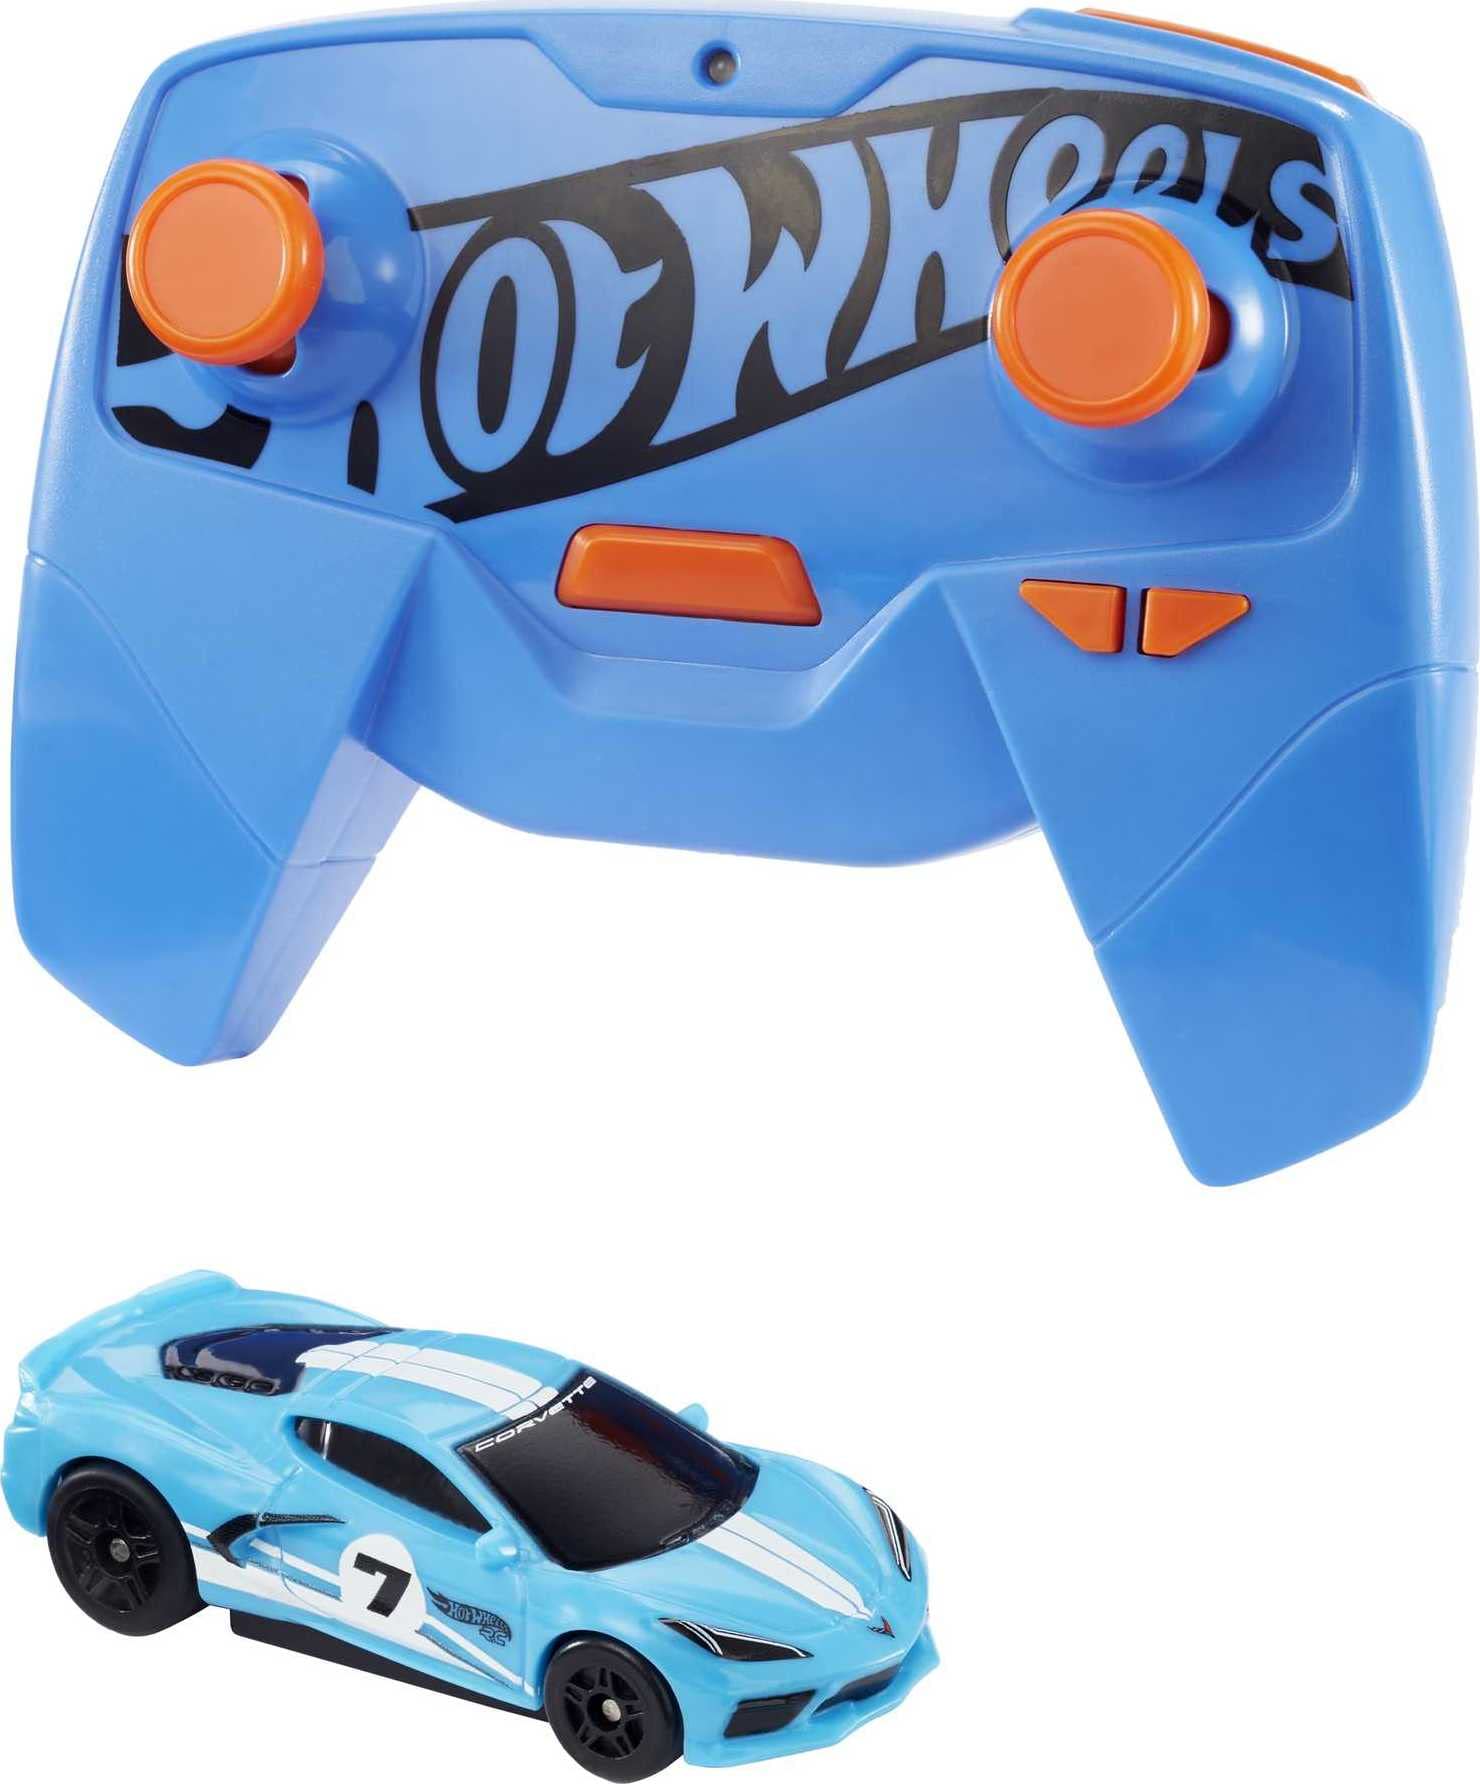 Hot Wheels Rc C8 Corvette in 1:64 Scale, Remote-Control Toy Car with Controller & Track Adapter, Works On & Off Track